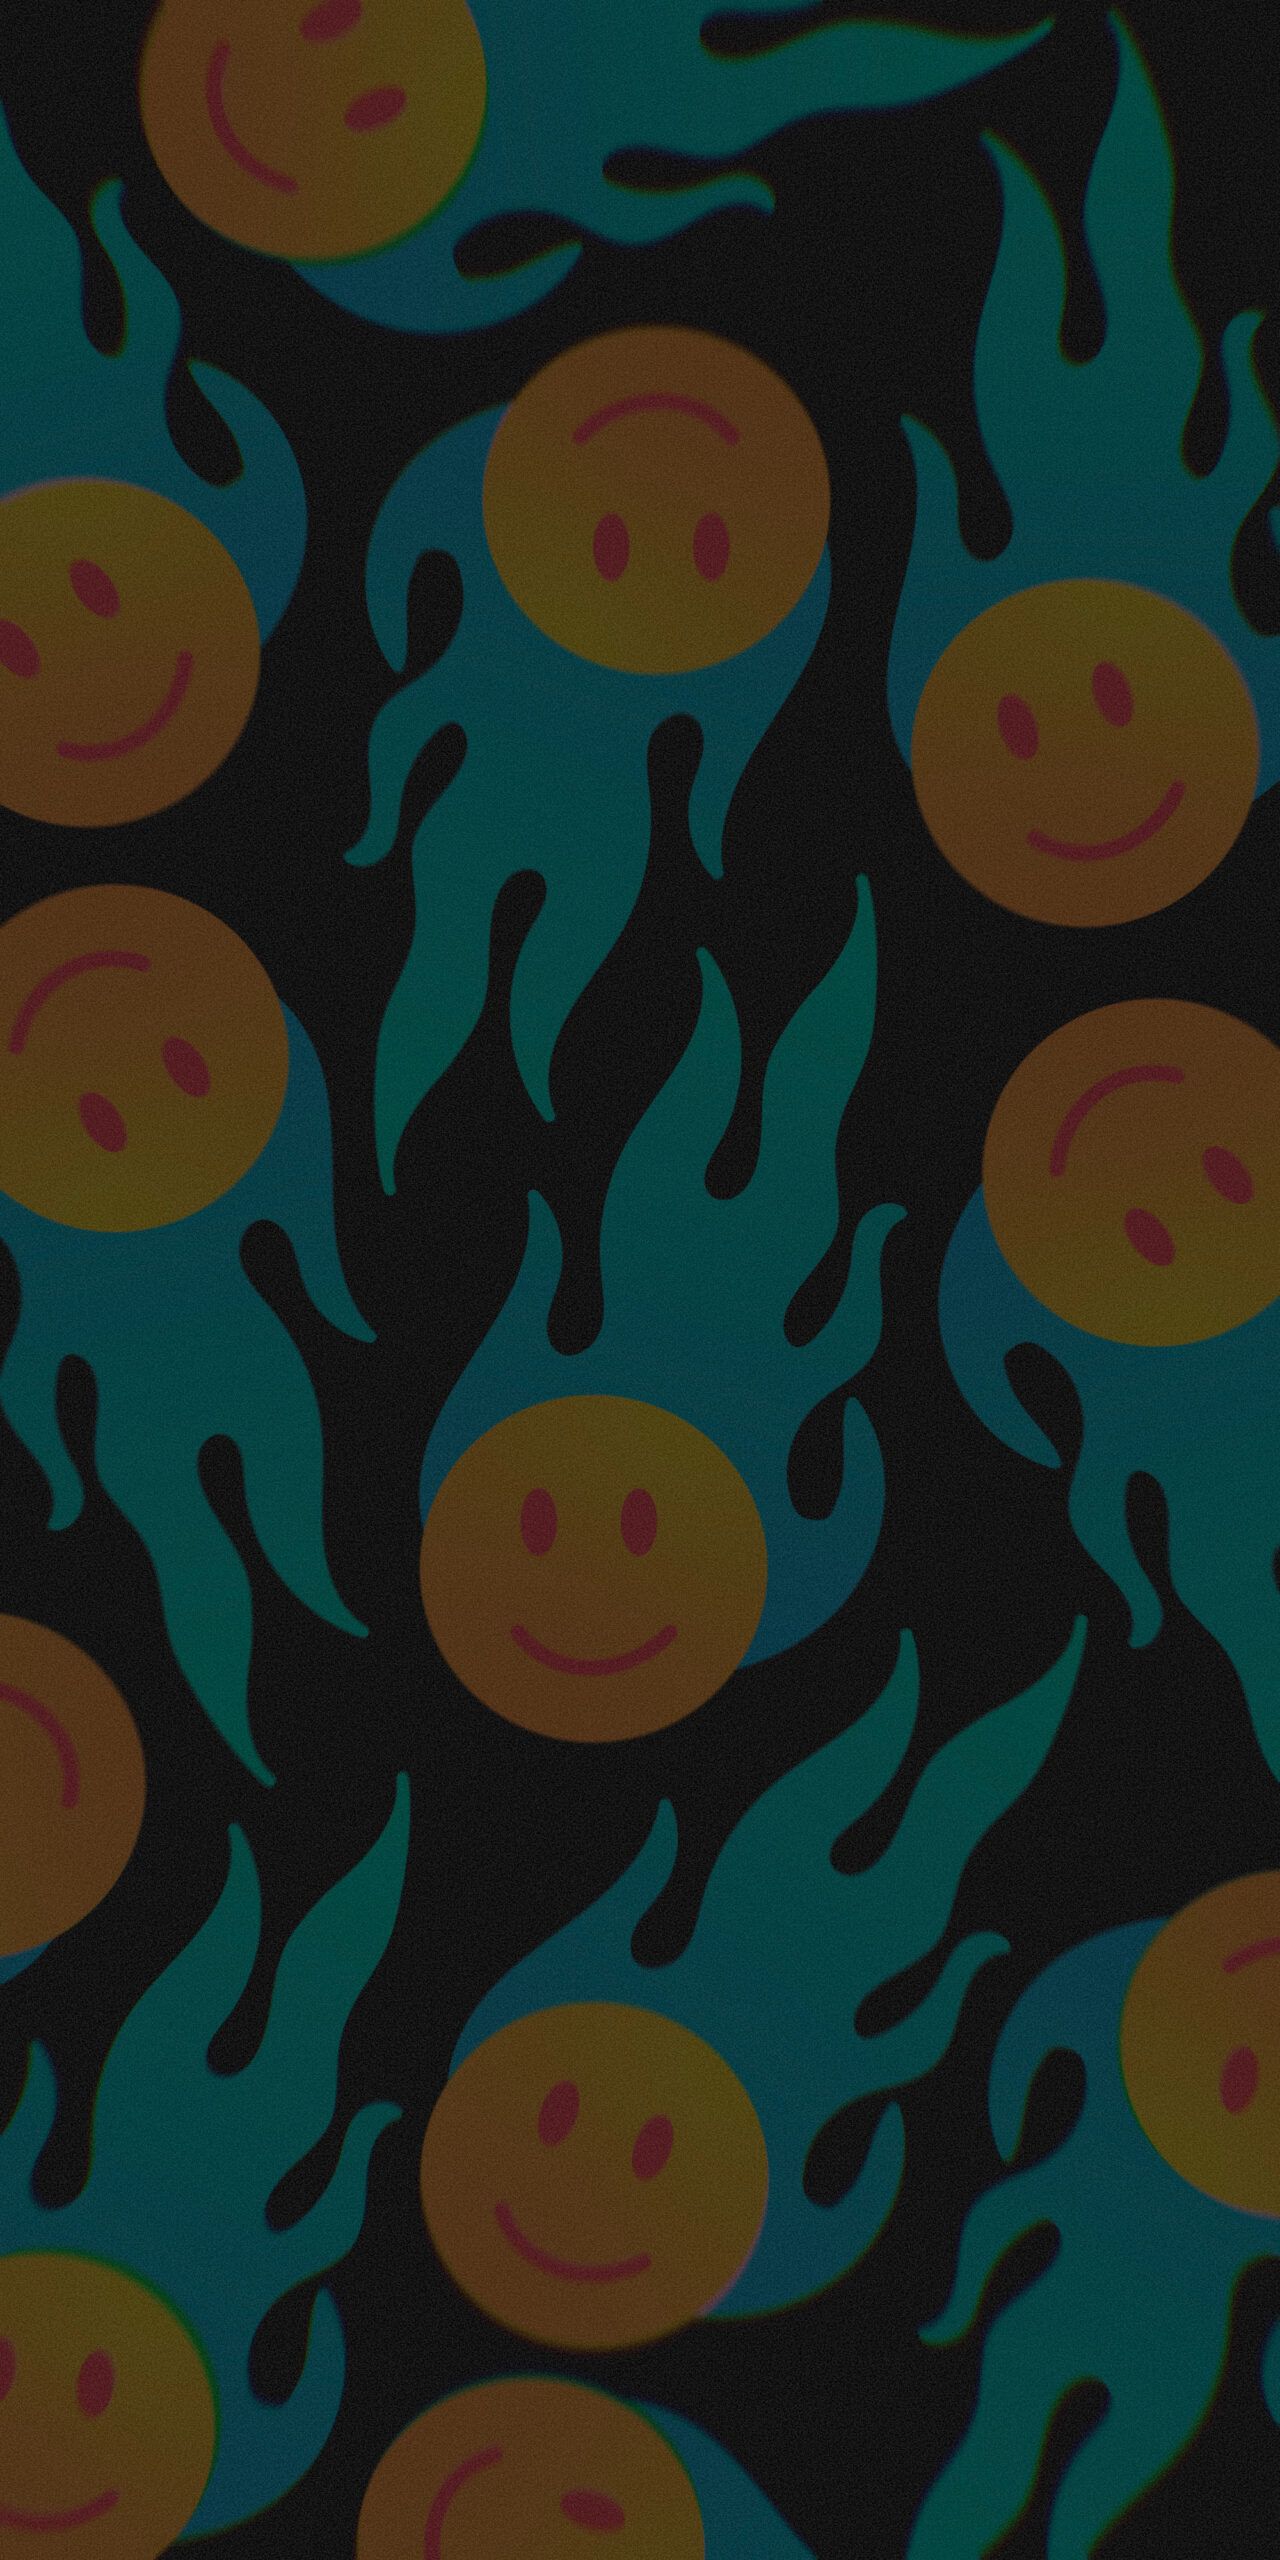 A wallpaper of a smiley face on fire - Smile, Smiley